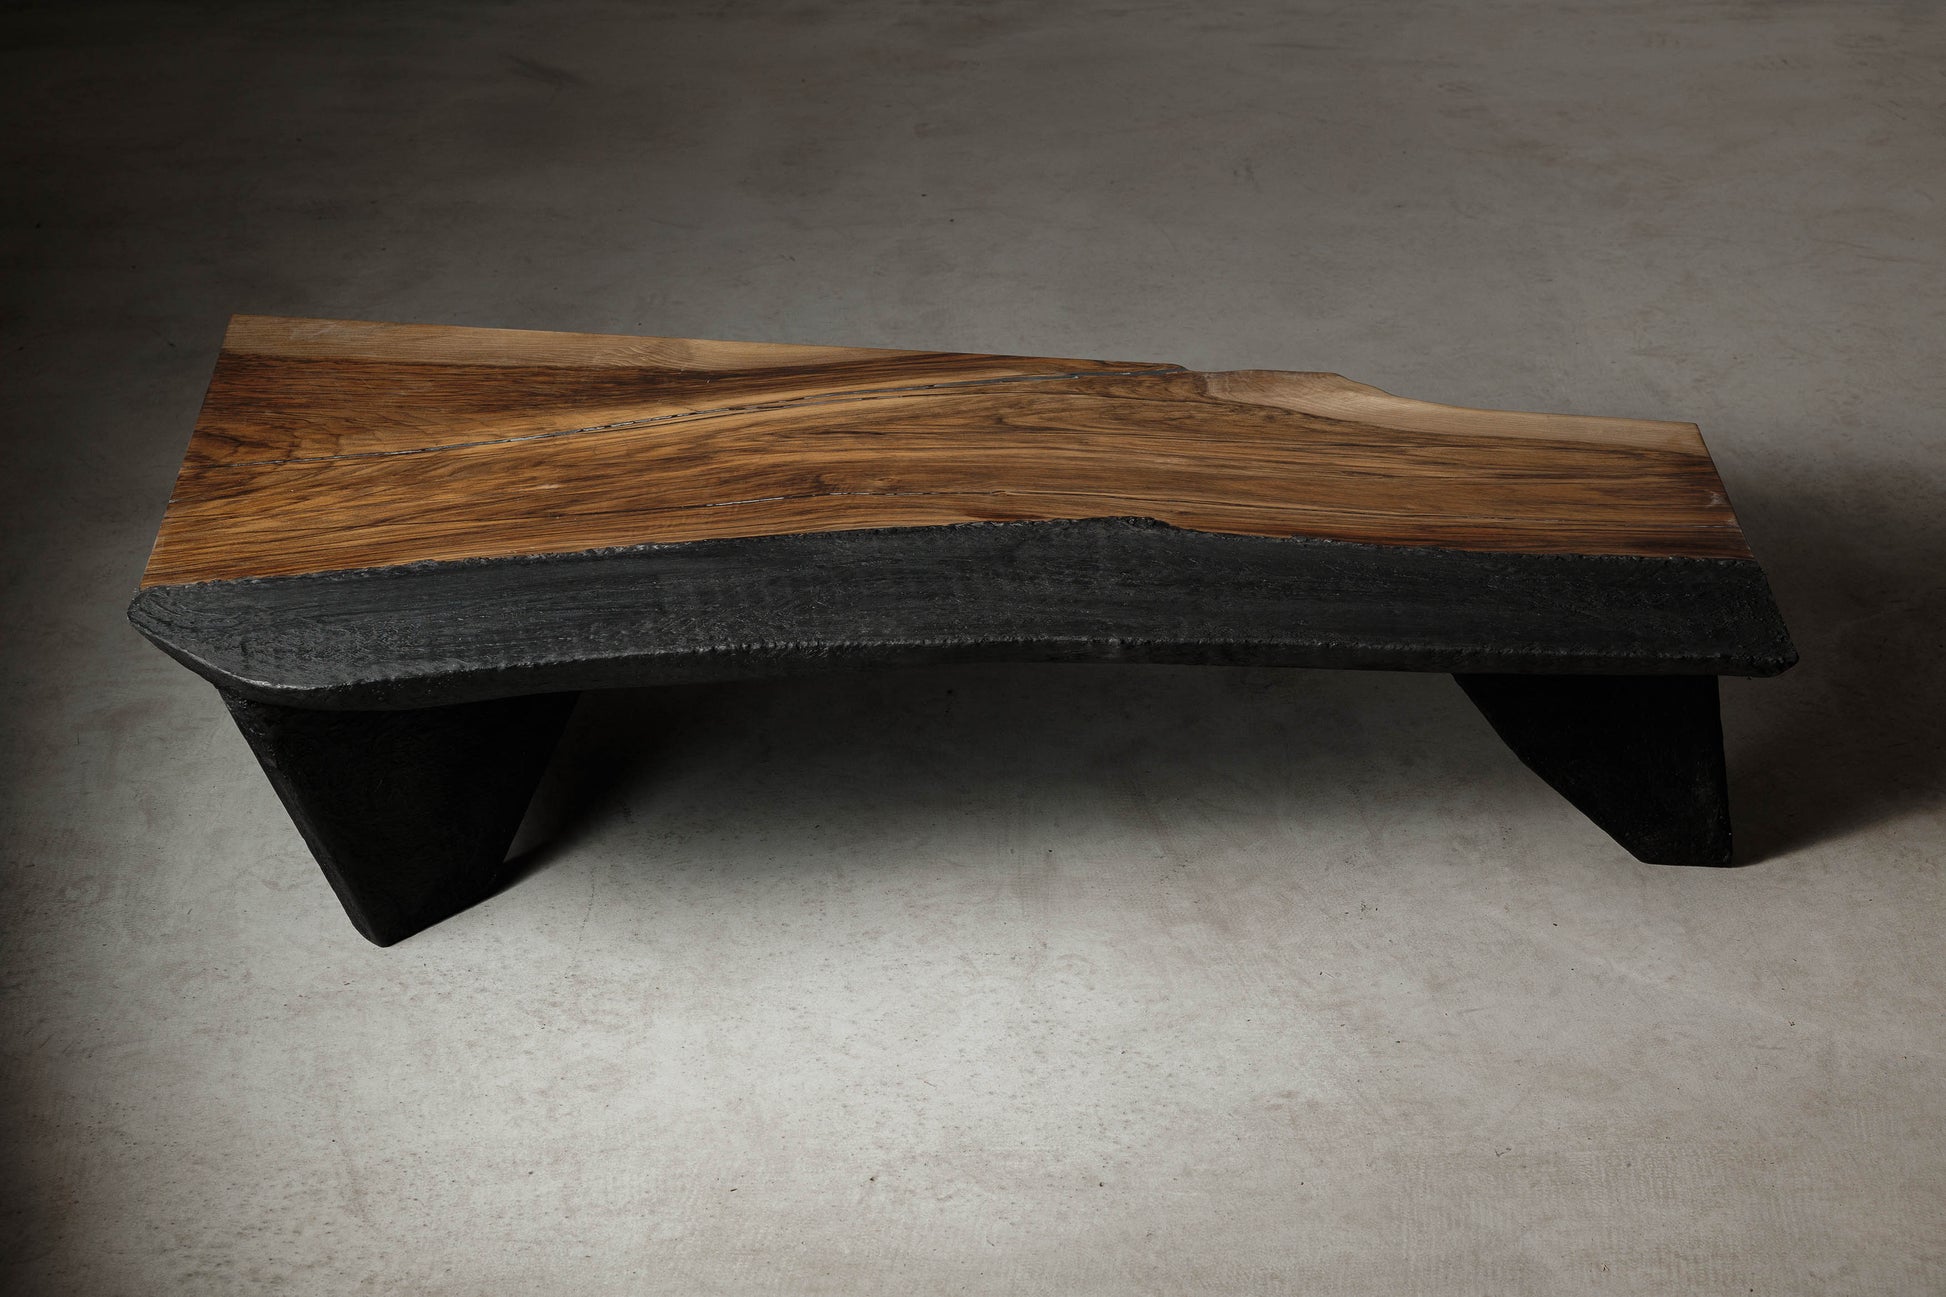 Brutalist Coffee Table With Japandi Influences EM106 Part Of 18Brut Collection | Sideview from above 